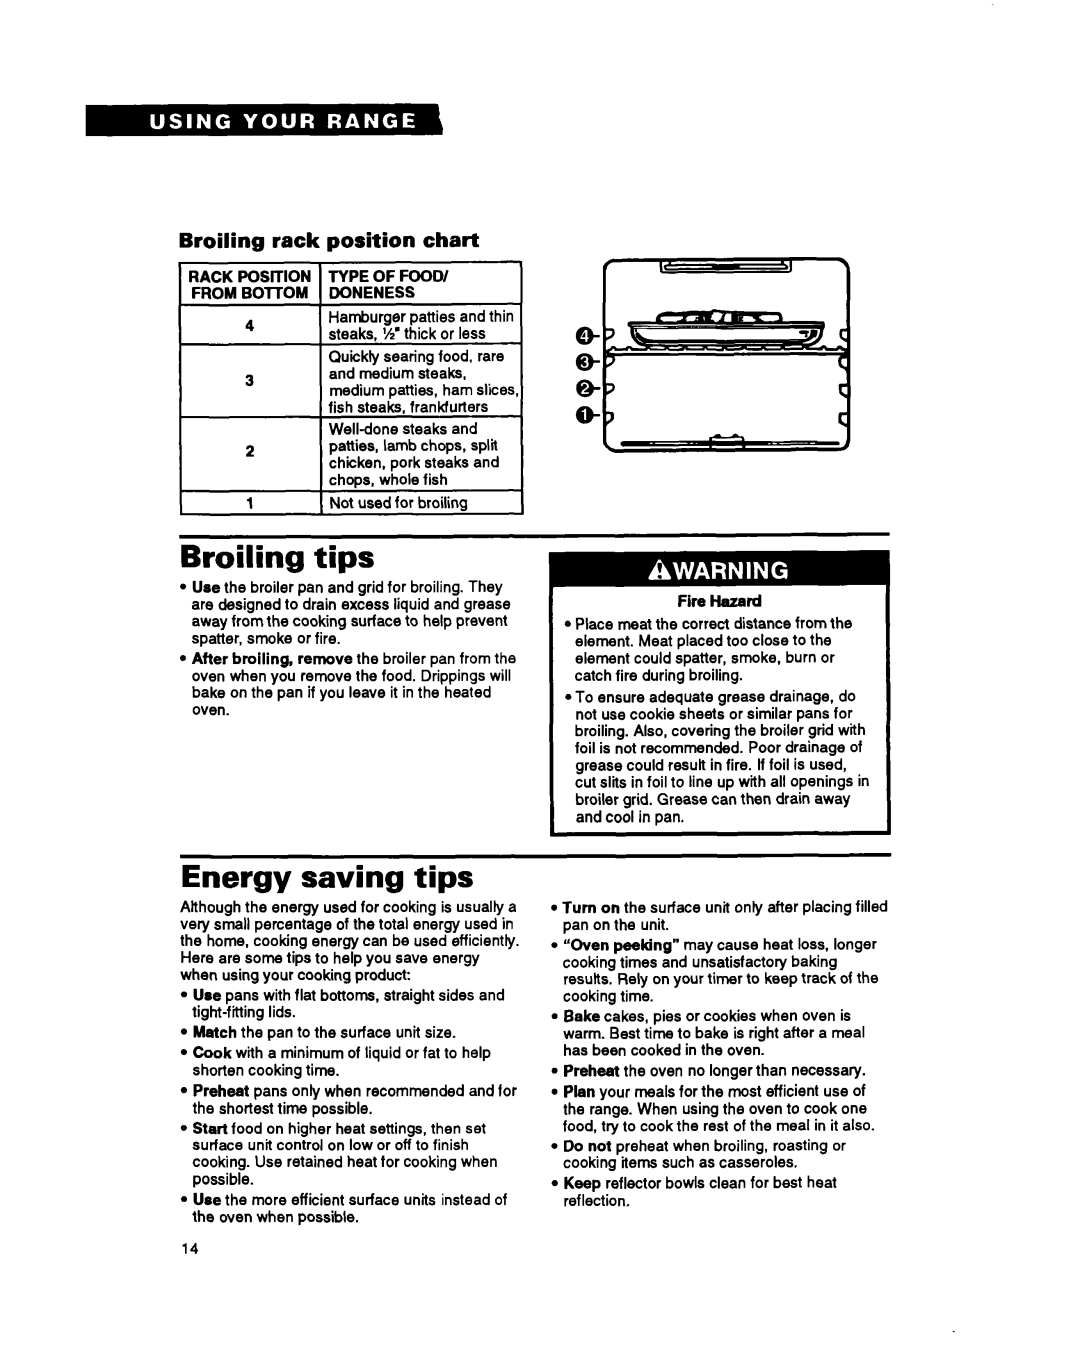 Whirlpool RS6305XB, RS630PXB warranty Broiling tips, Energy saving tips, Broiling rack position chart 